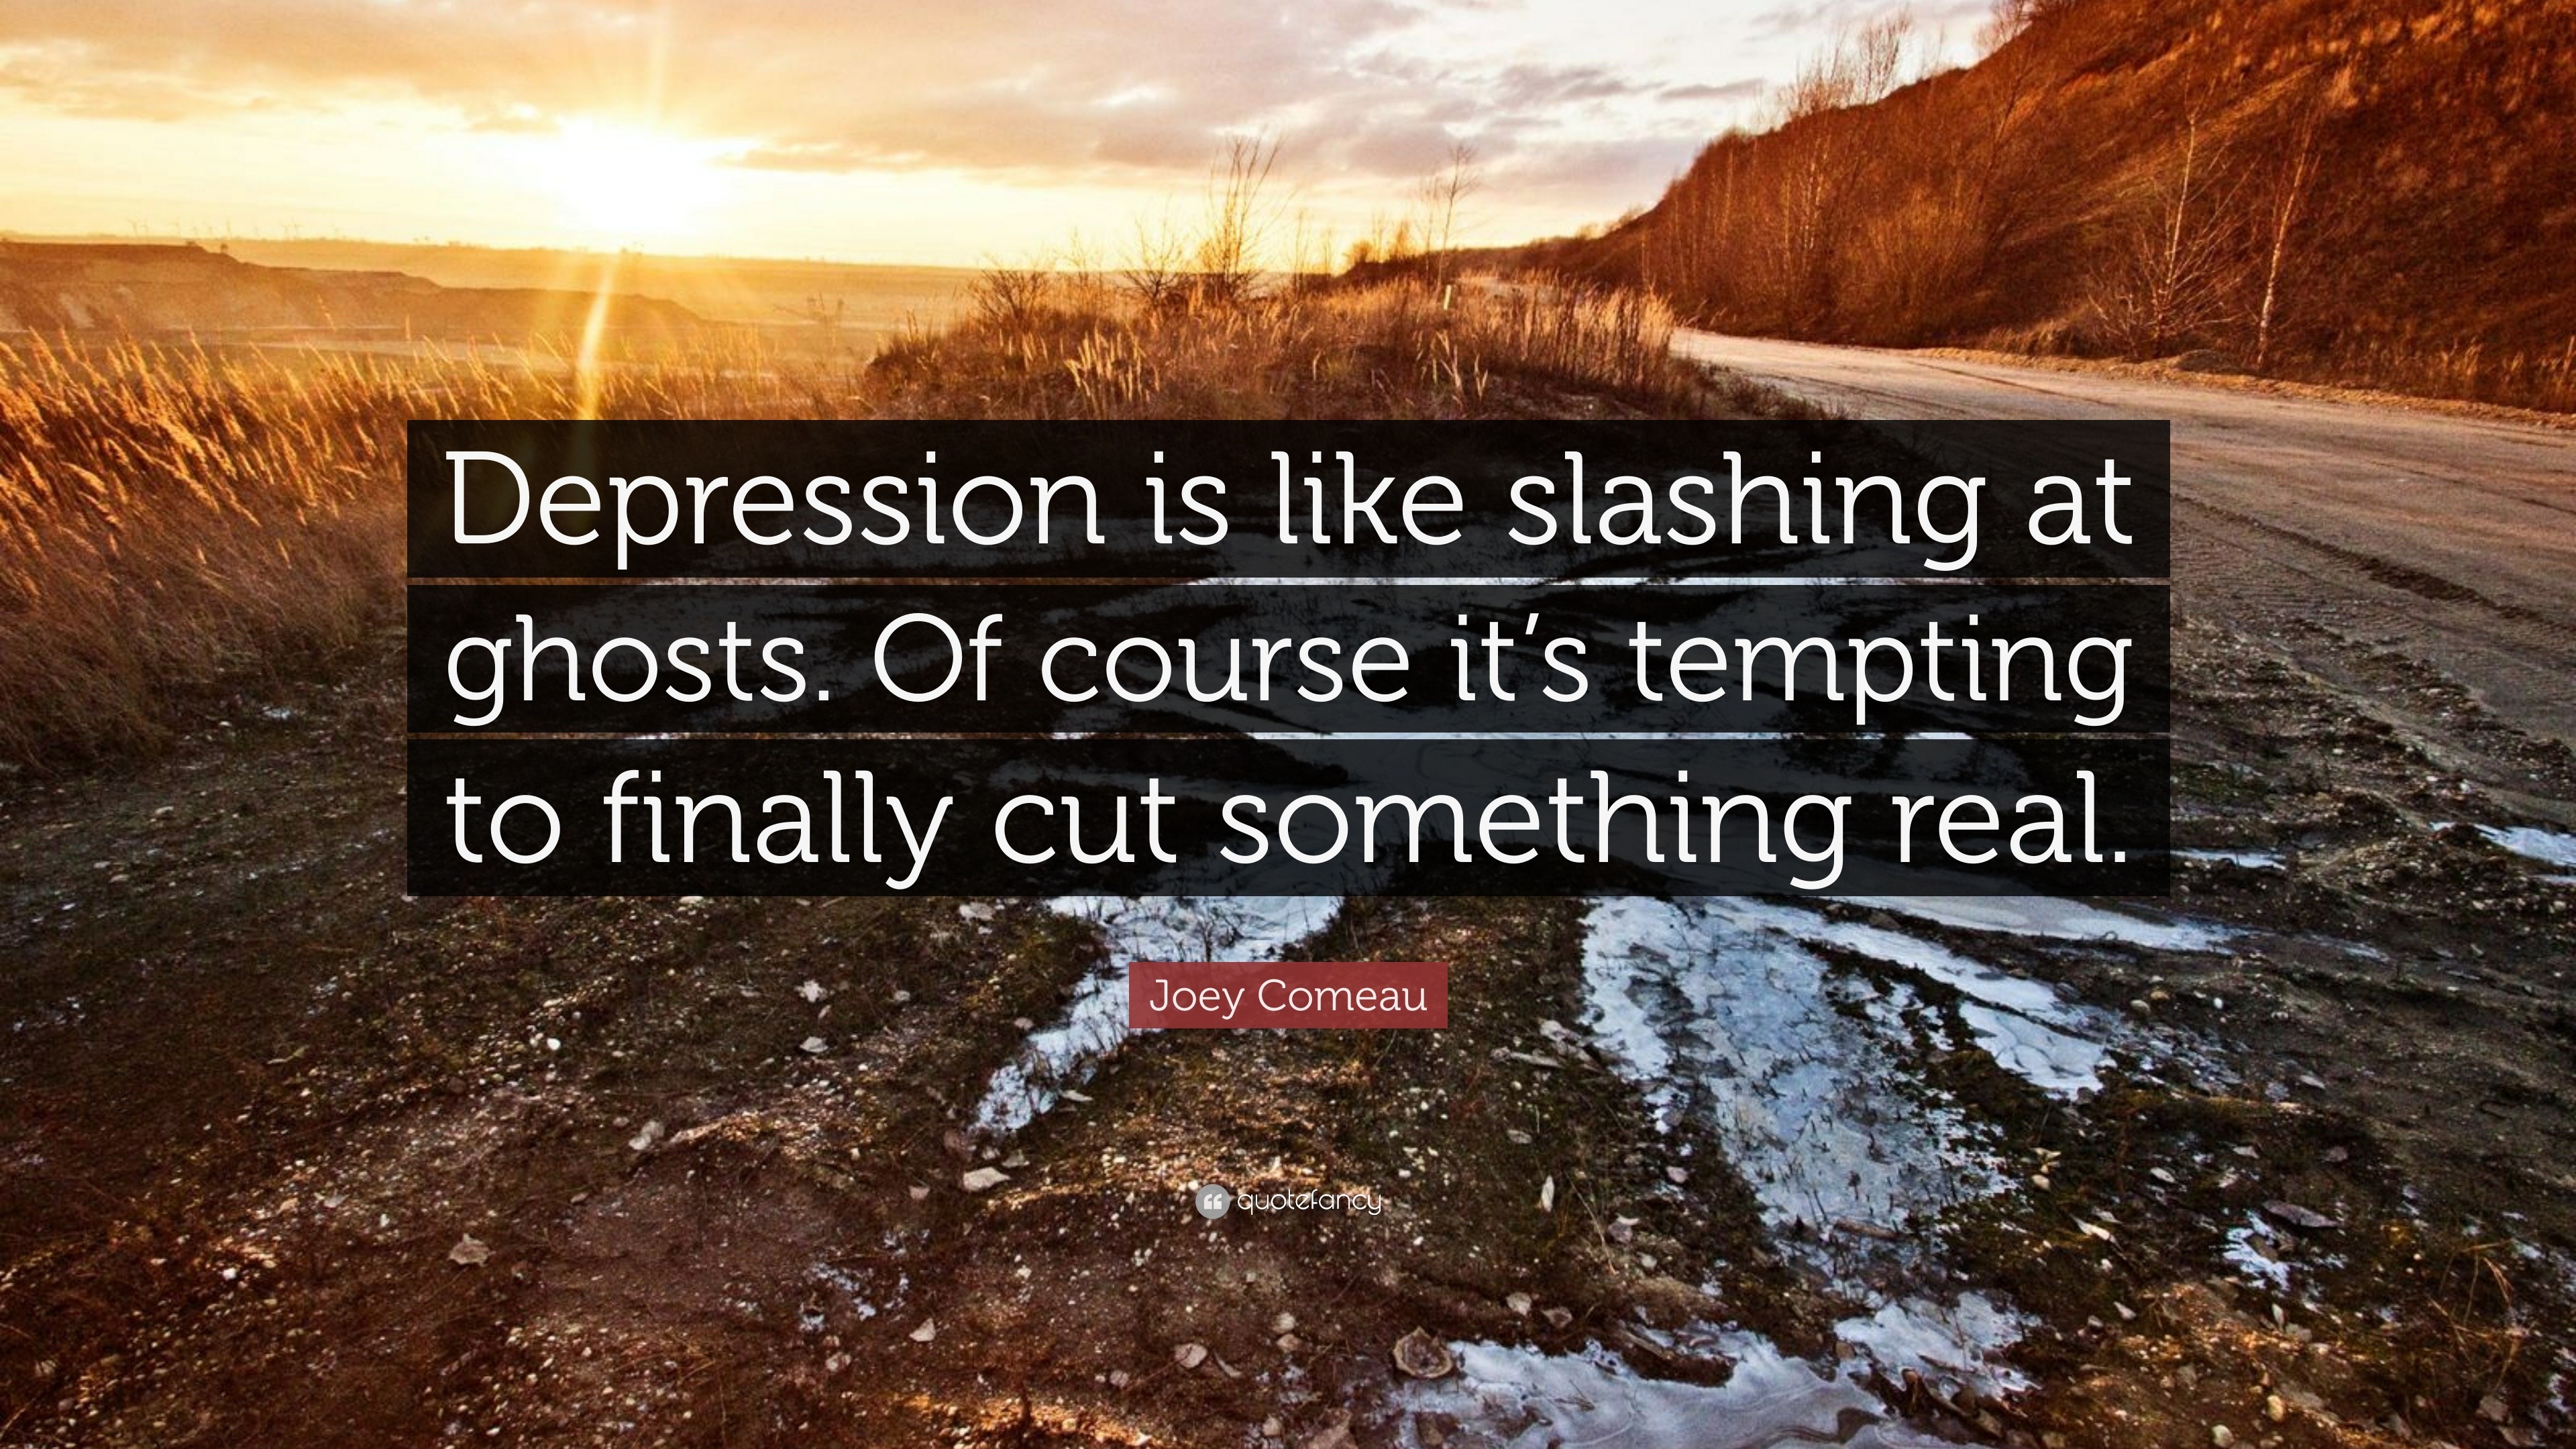 https://quotefancy.com/media/wallpaper/3840x2160/1165287-Joey-Comeau-Quote-Depression-is-like-slashing-at-ghosts-Of-course.jpg